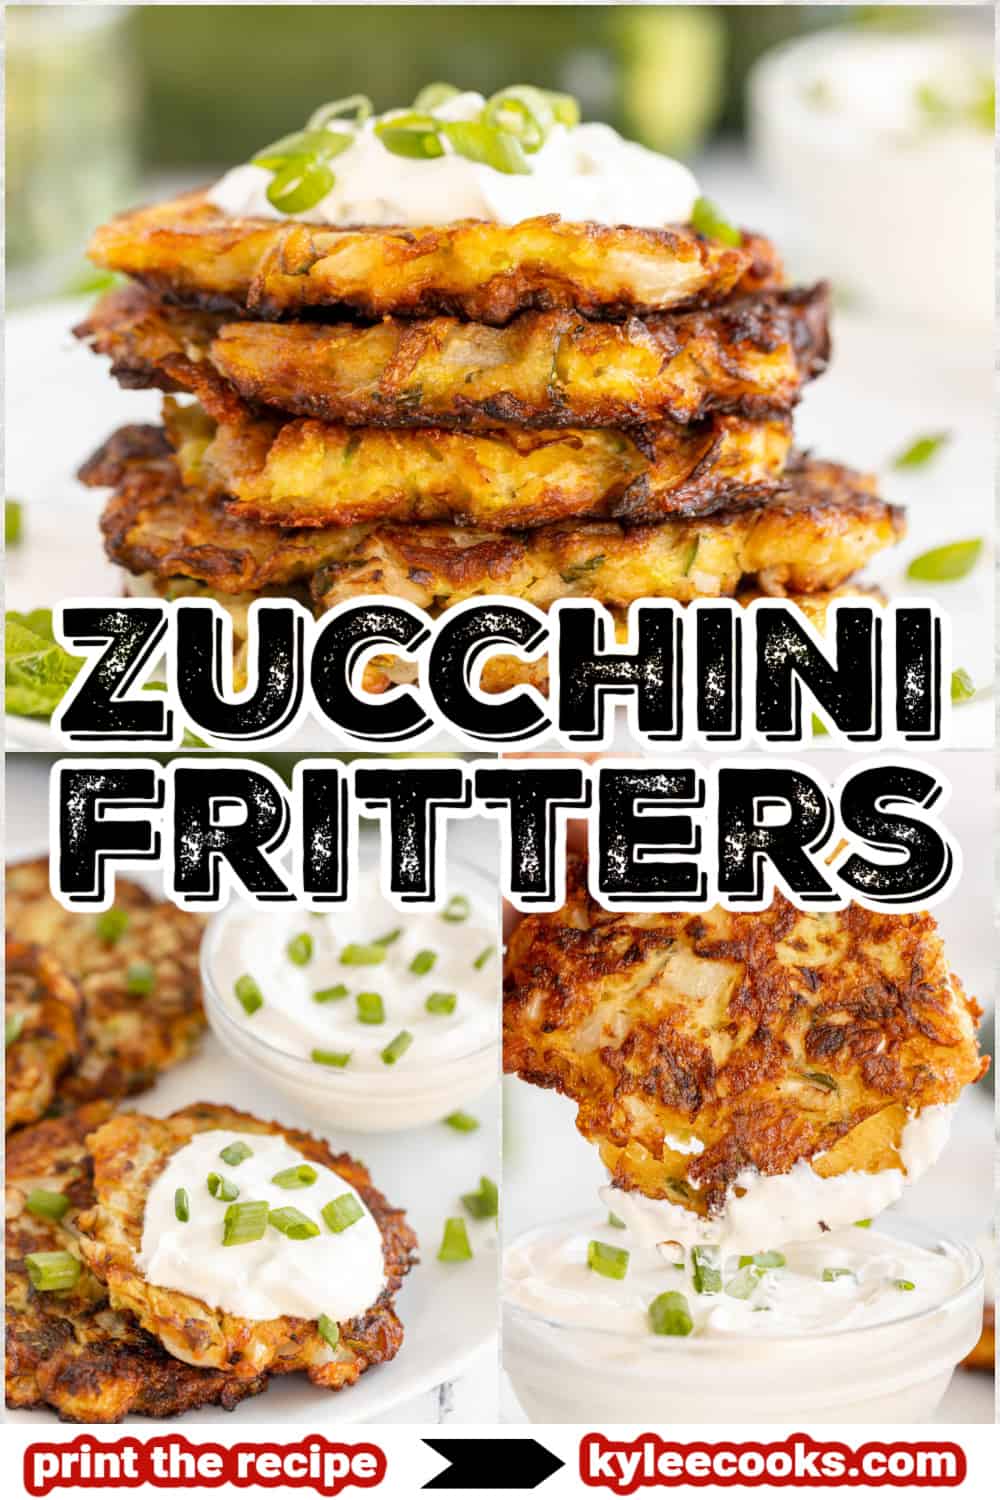 zucchini fritters stacked on a plate with sour cream and green onions on top, with recipe title overlaid in text.